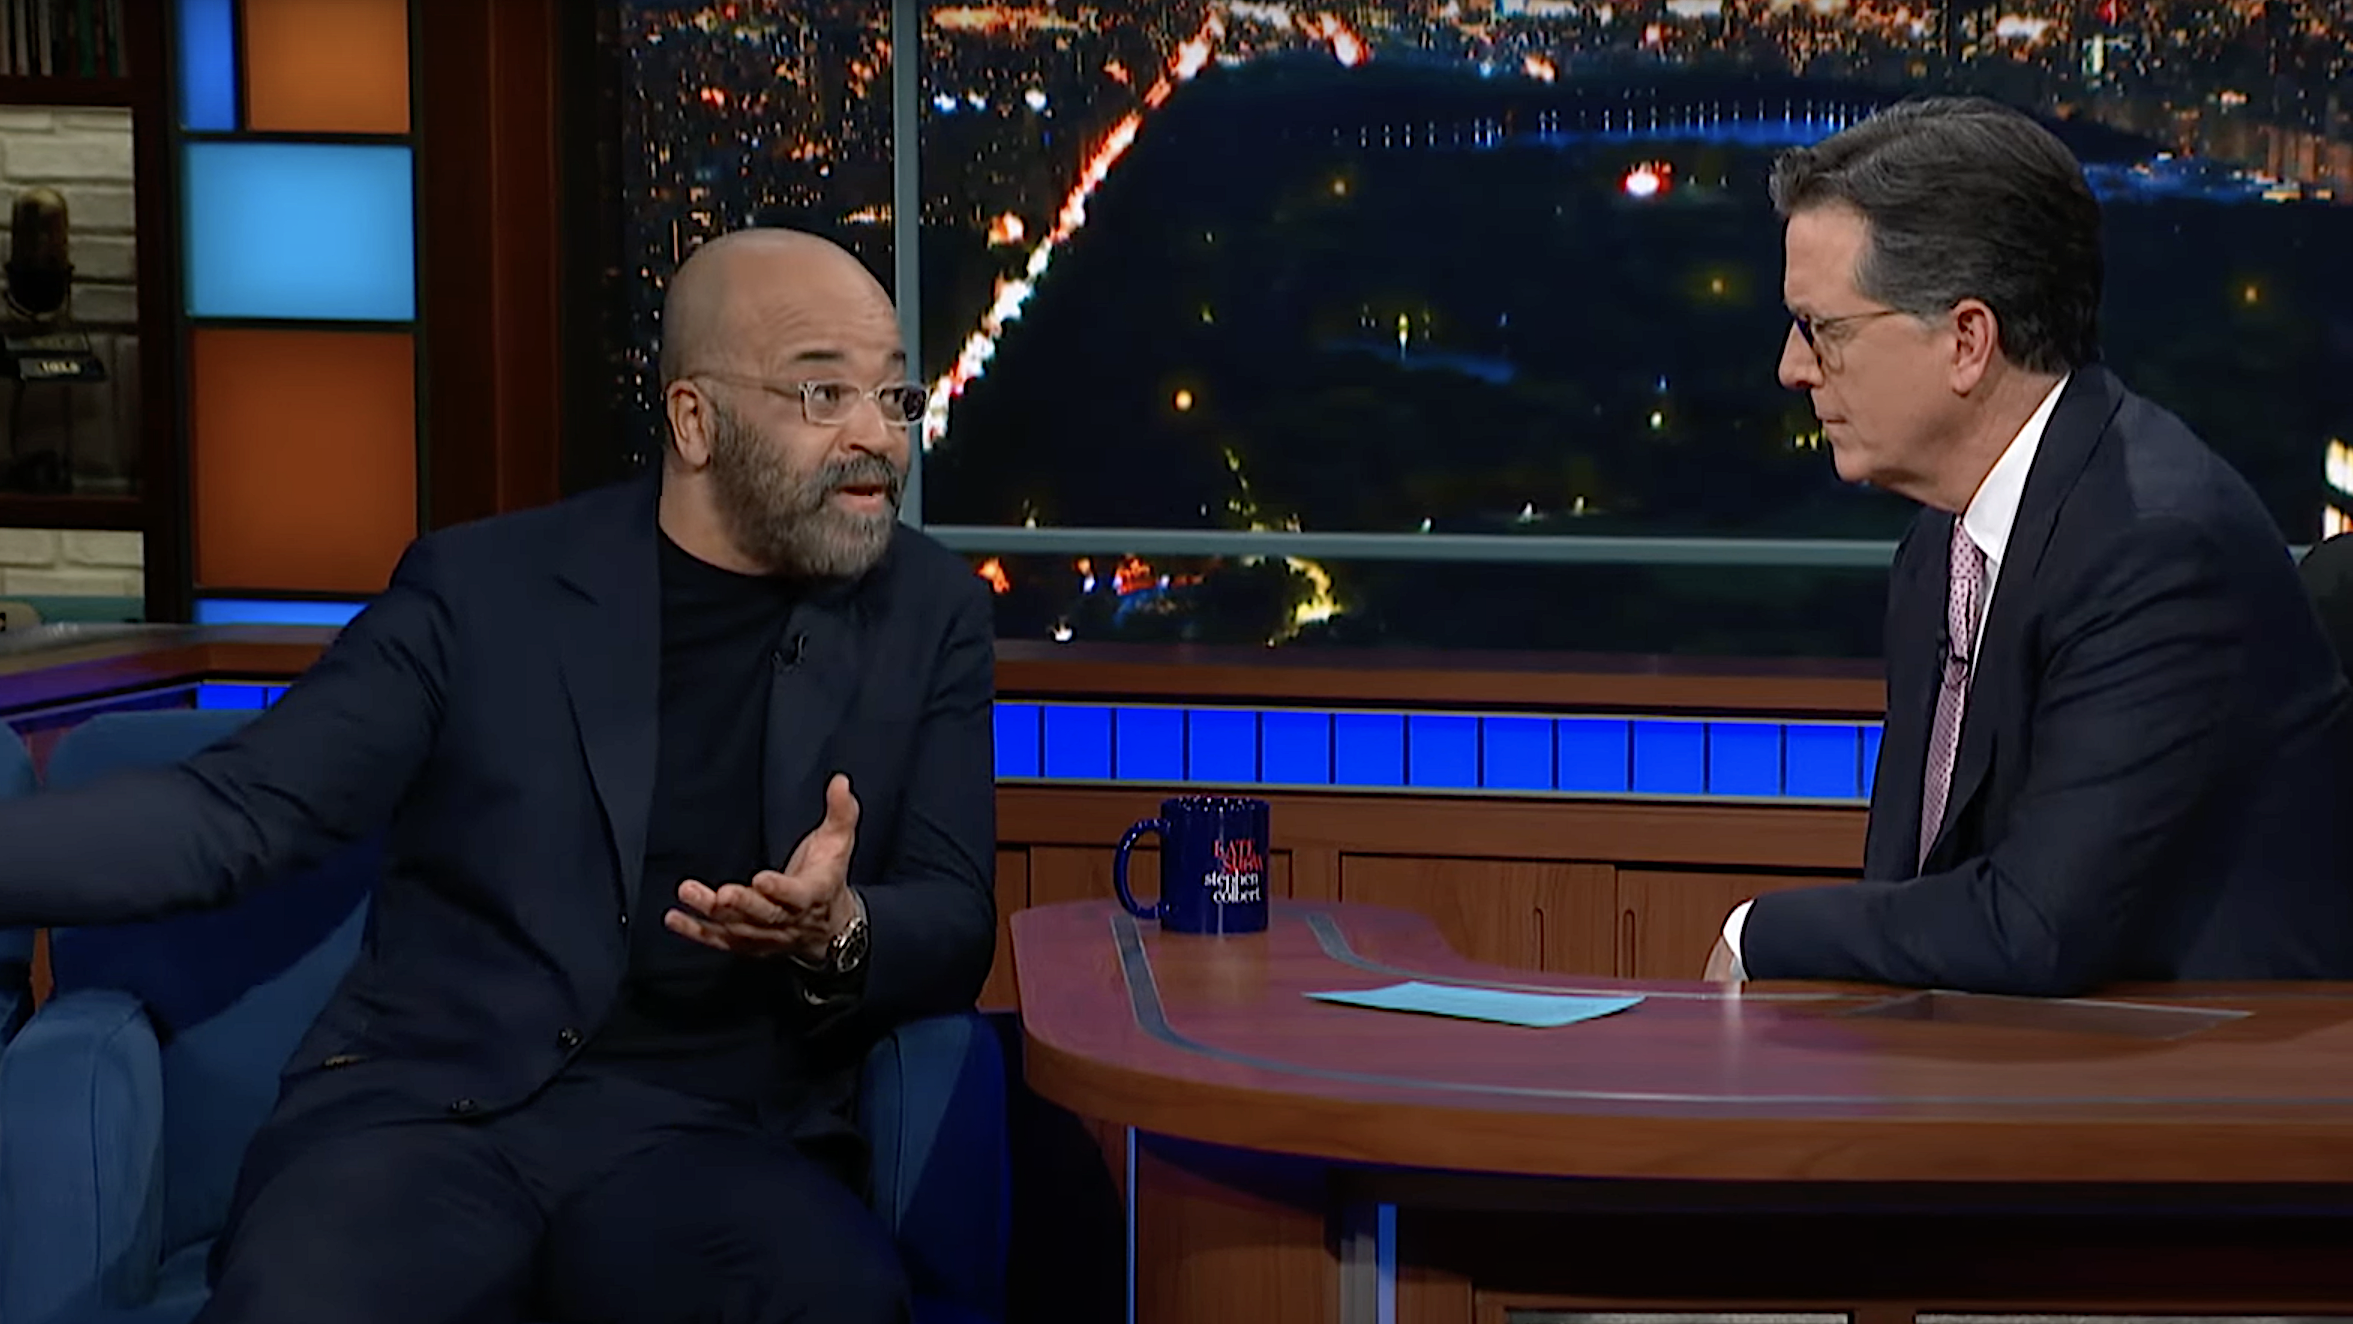 Jeffrey Wright drops some Lincoln-era wisdom into our present-day conversation about race